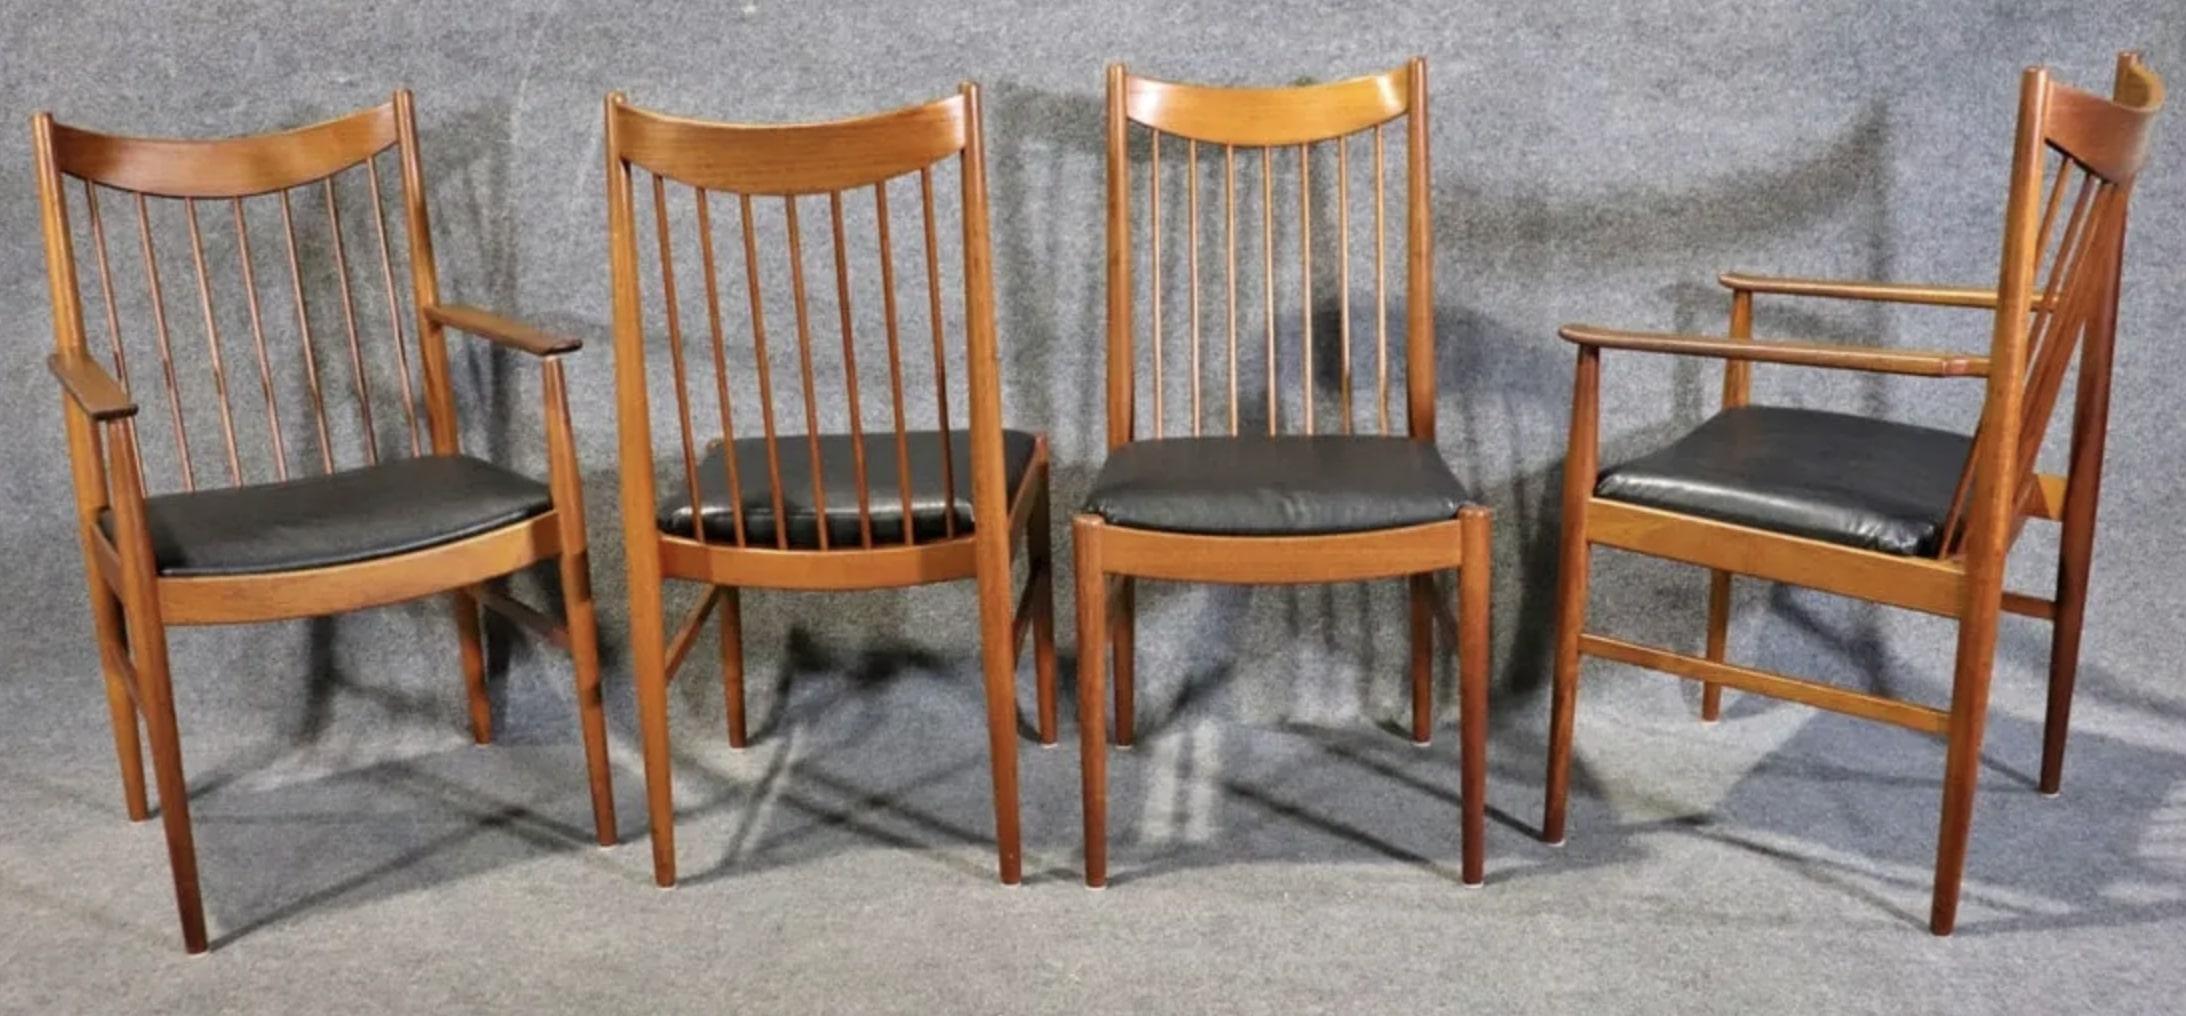 Helge Sibast Designed Set of 8 Chairs In Good Condition For Sale In Brooklyn, NY